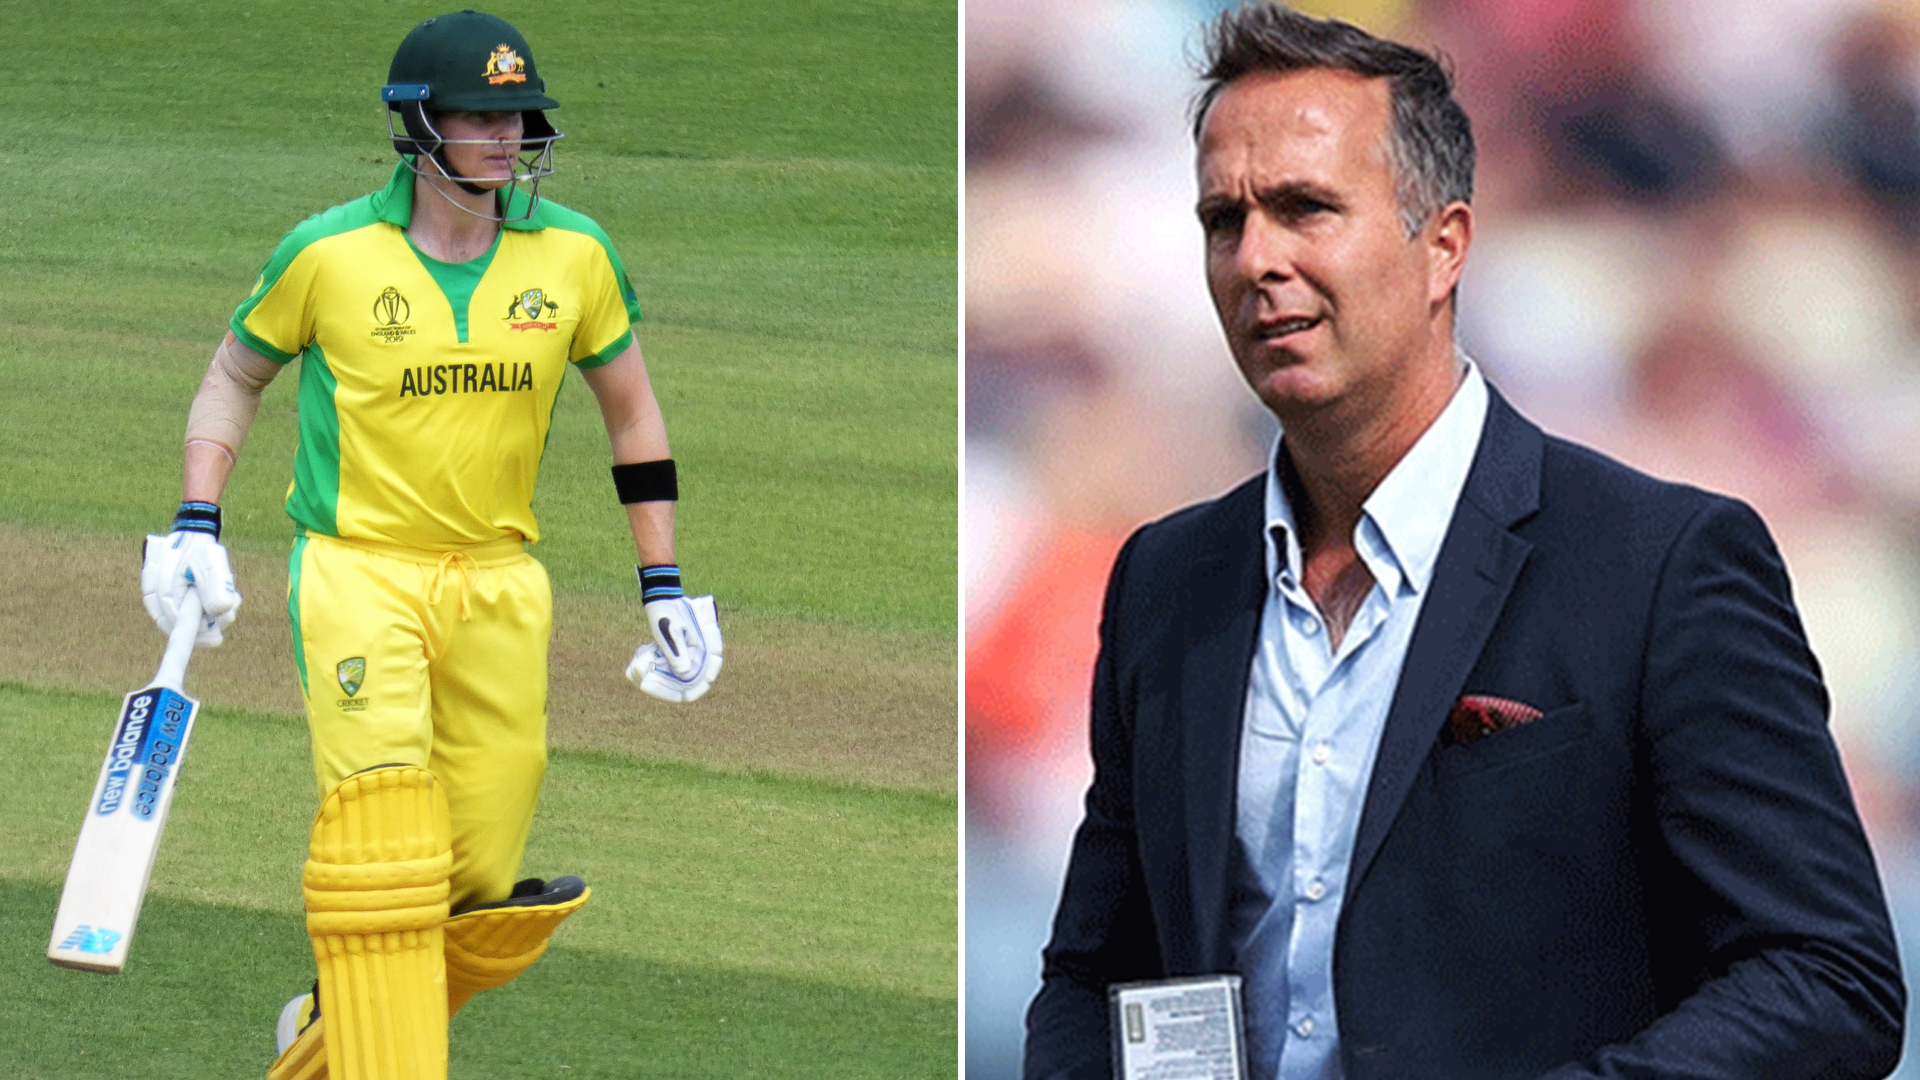 Will Steve Smith Play In the T20 World Cup Or Not? Michael Vaughan Gives a Huge Prediction